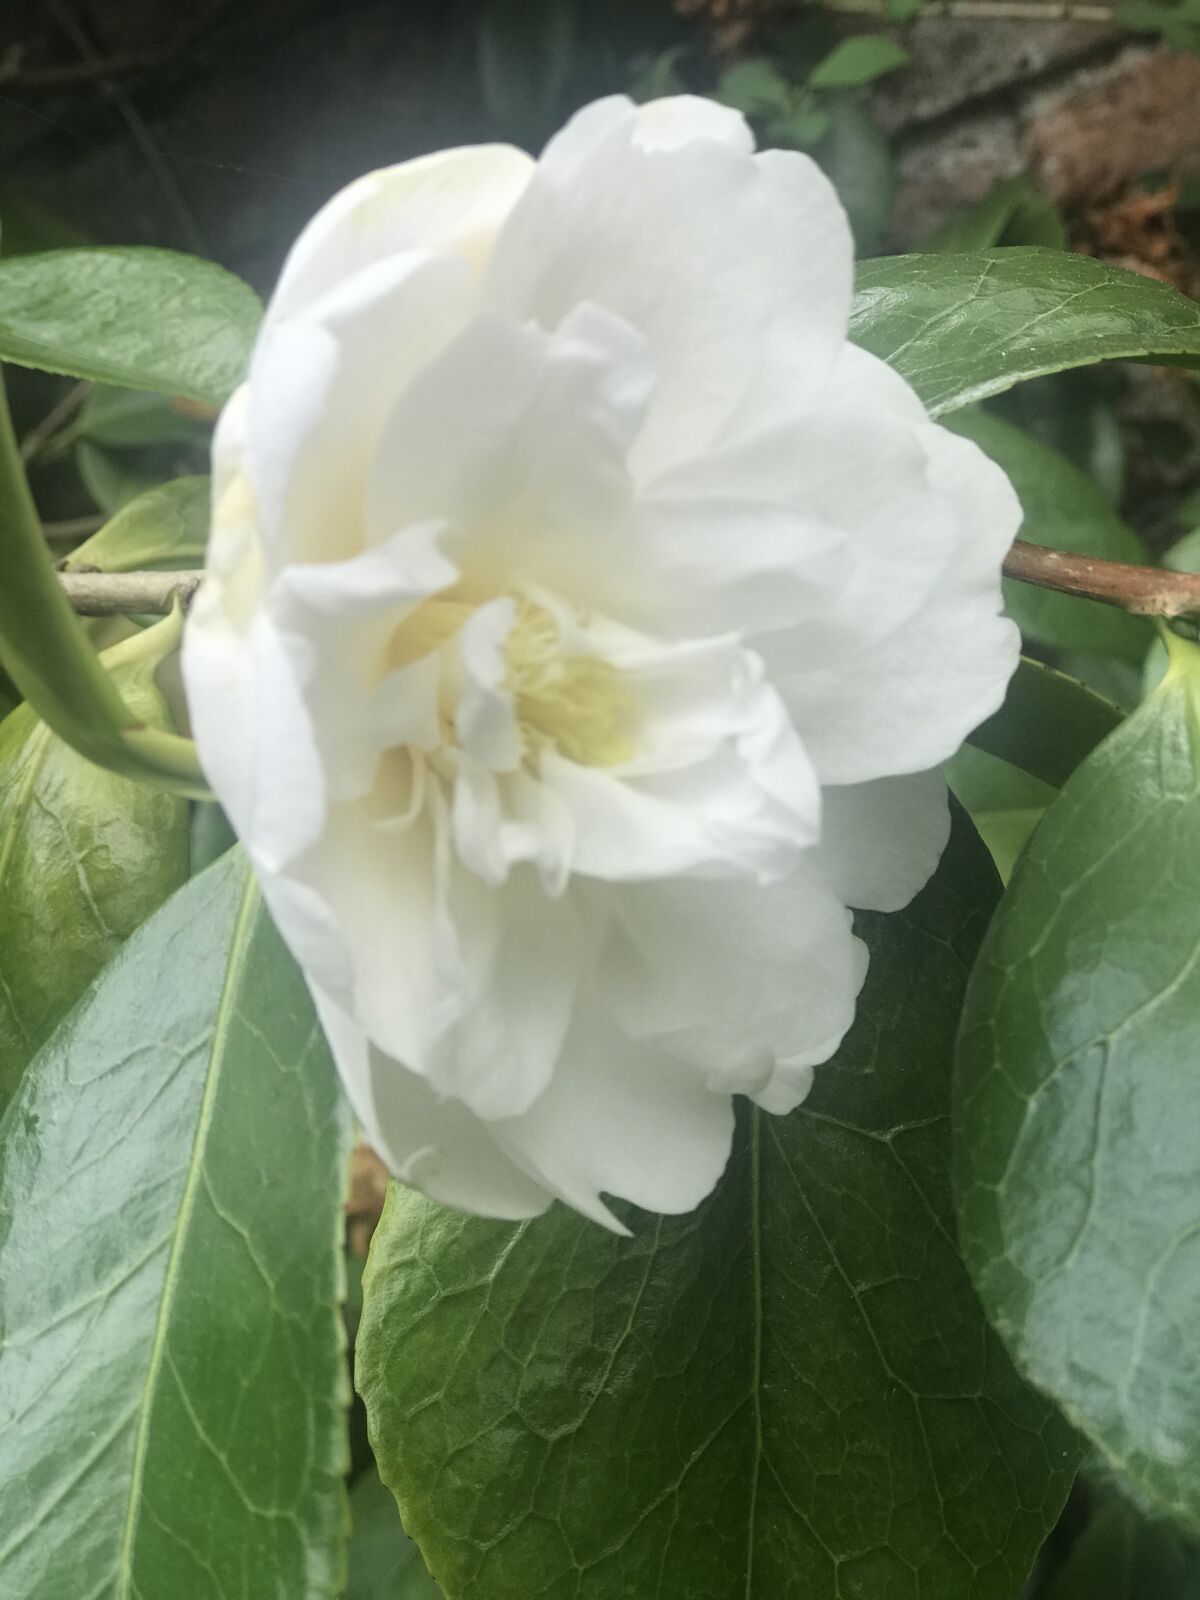 In addition to using the leaves for tea, the Camellia sinensis plant has beautiful white flowers.